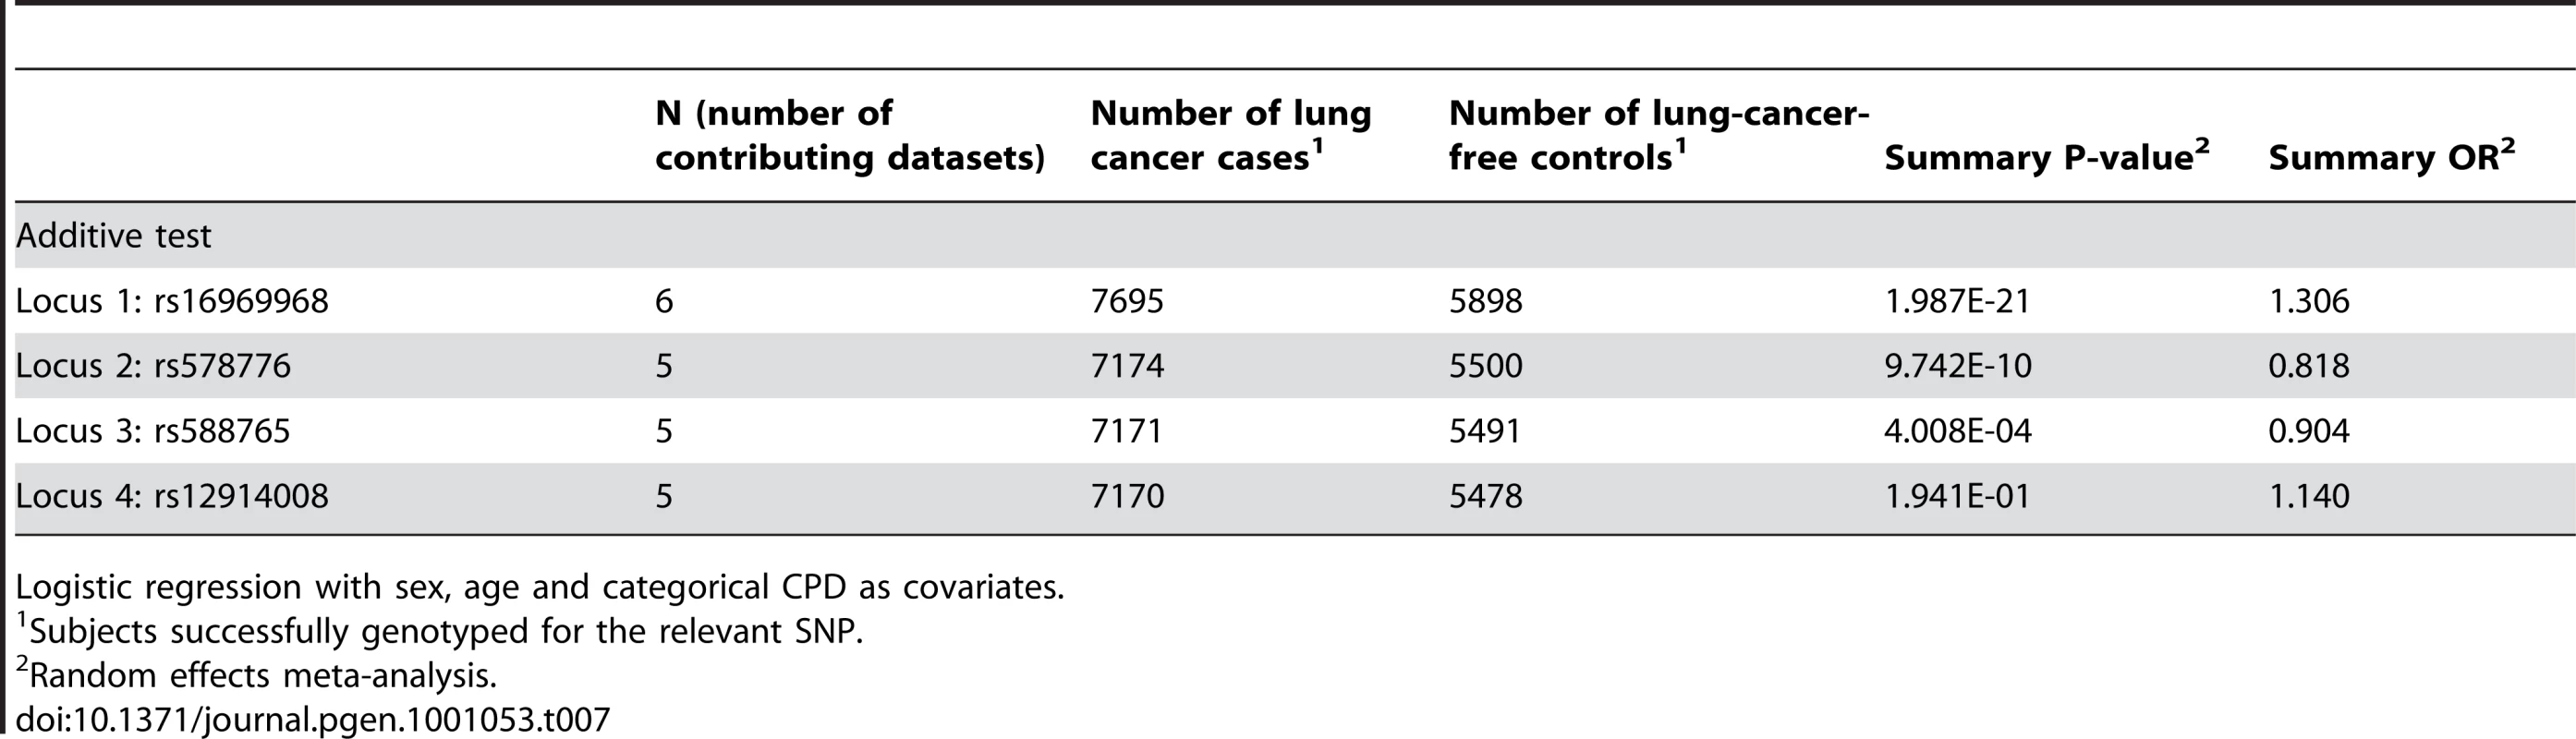 Meta-analysis results for lung cancer.